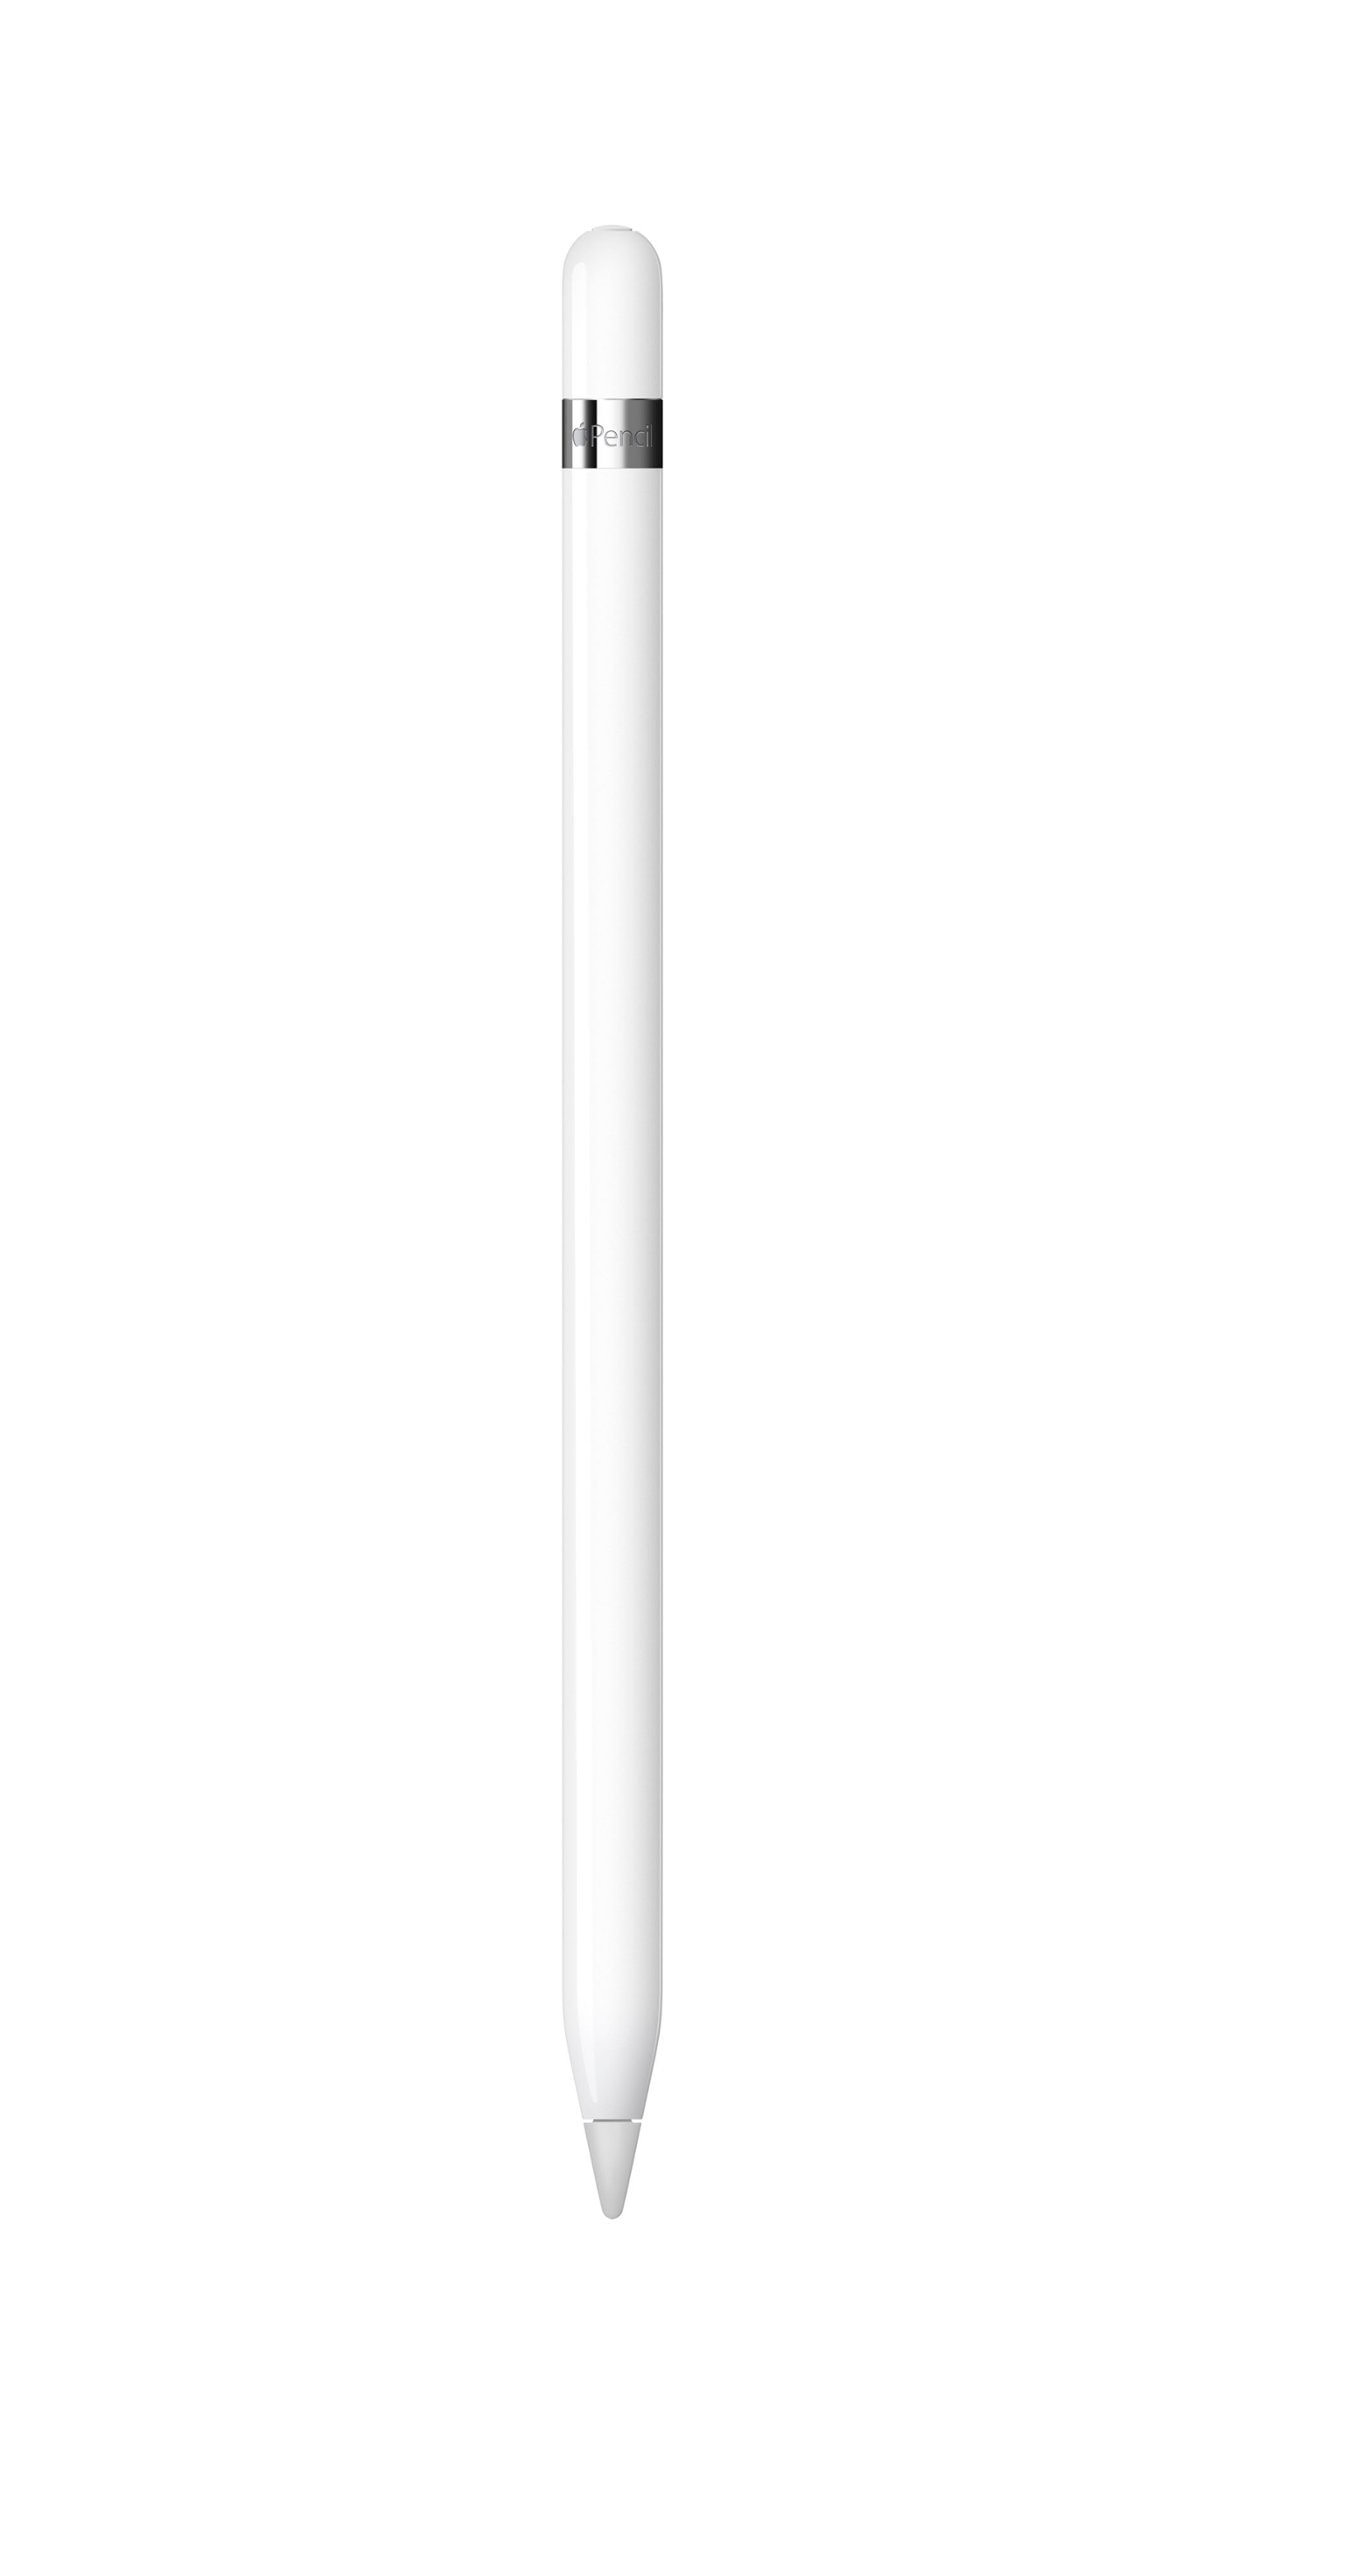 Apple Pencil 1st Gen w/ USB-C to Pencil Adapter White